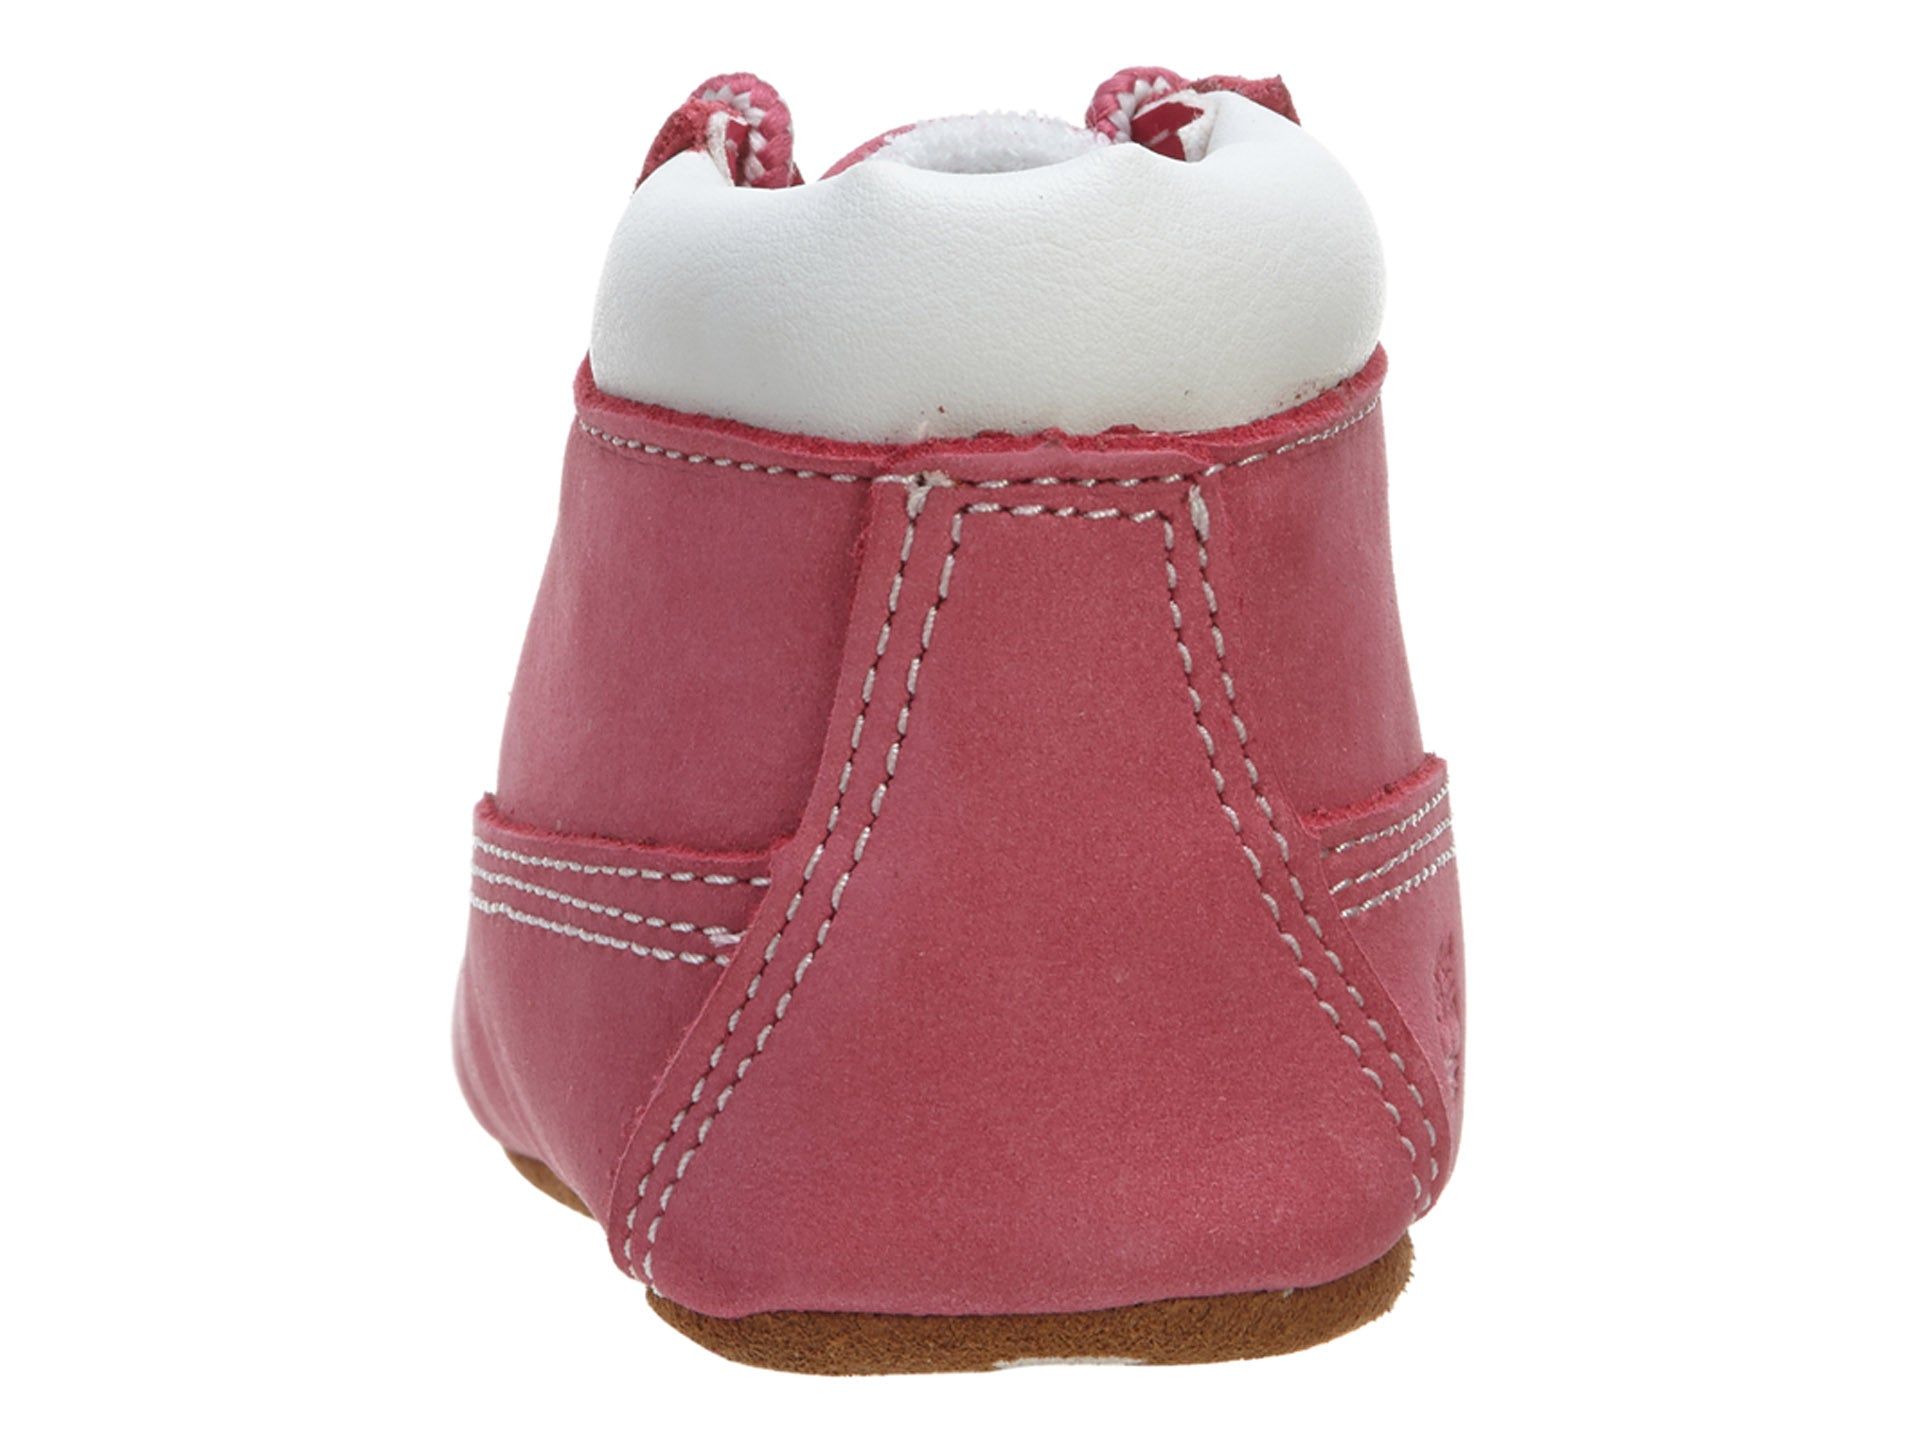 Timberland Hat Bootie Gift Set Crib Style : 9680r